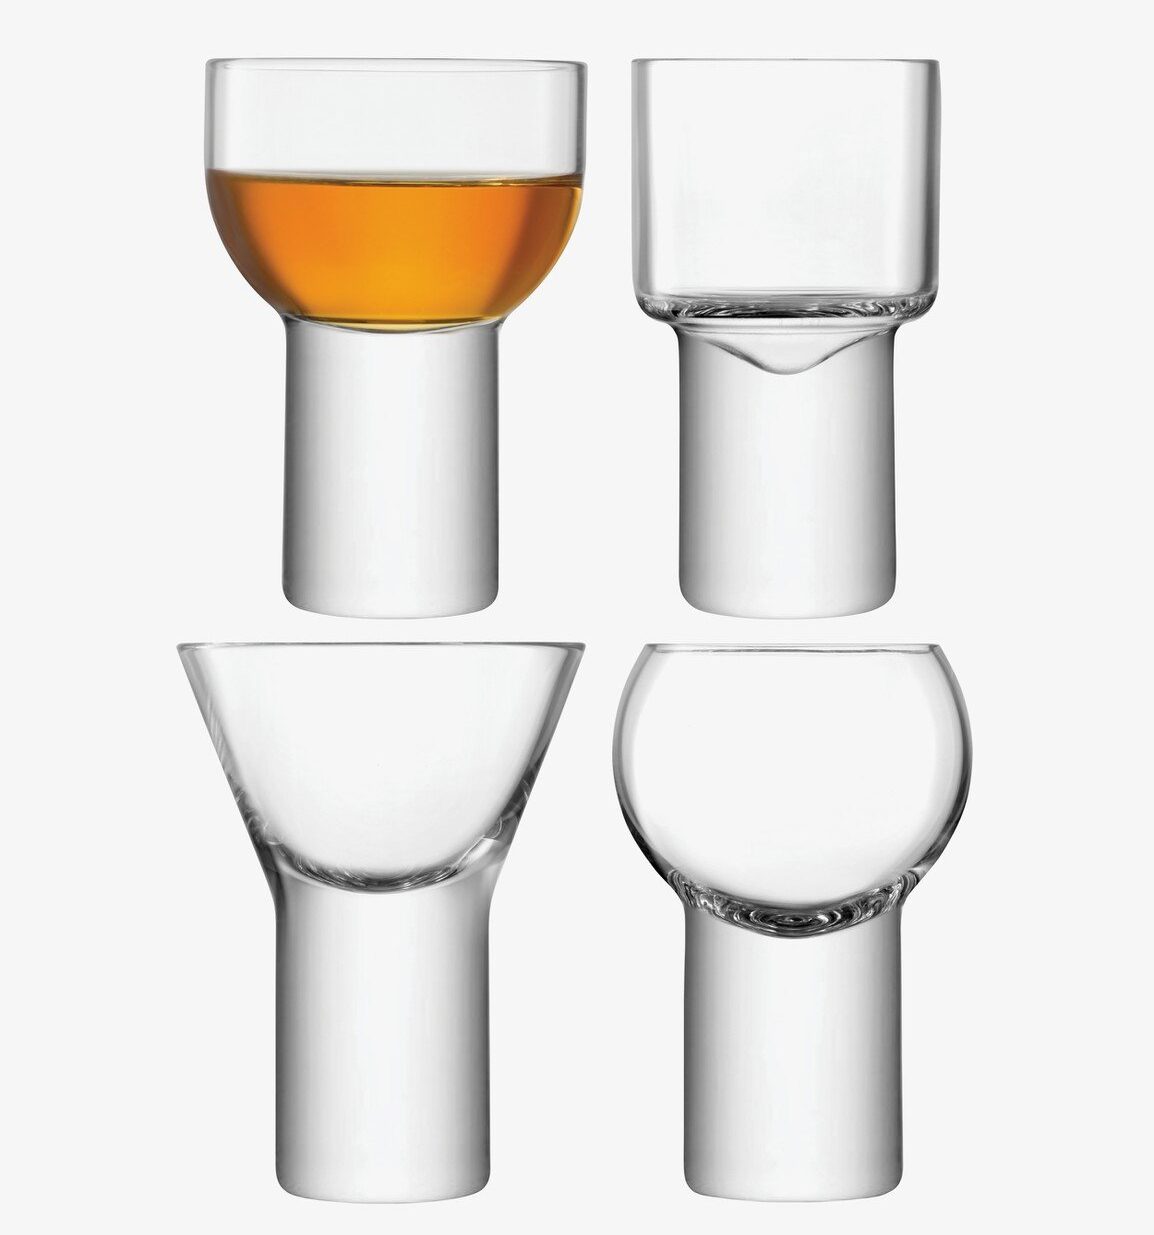 16 Chunky Glasses That Make Cocktail Hour Less Precious